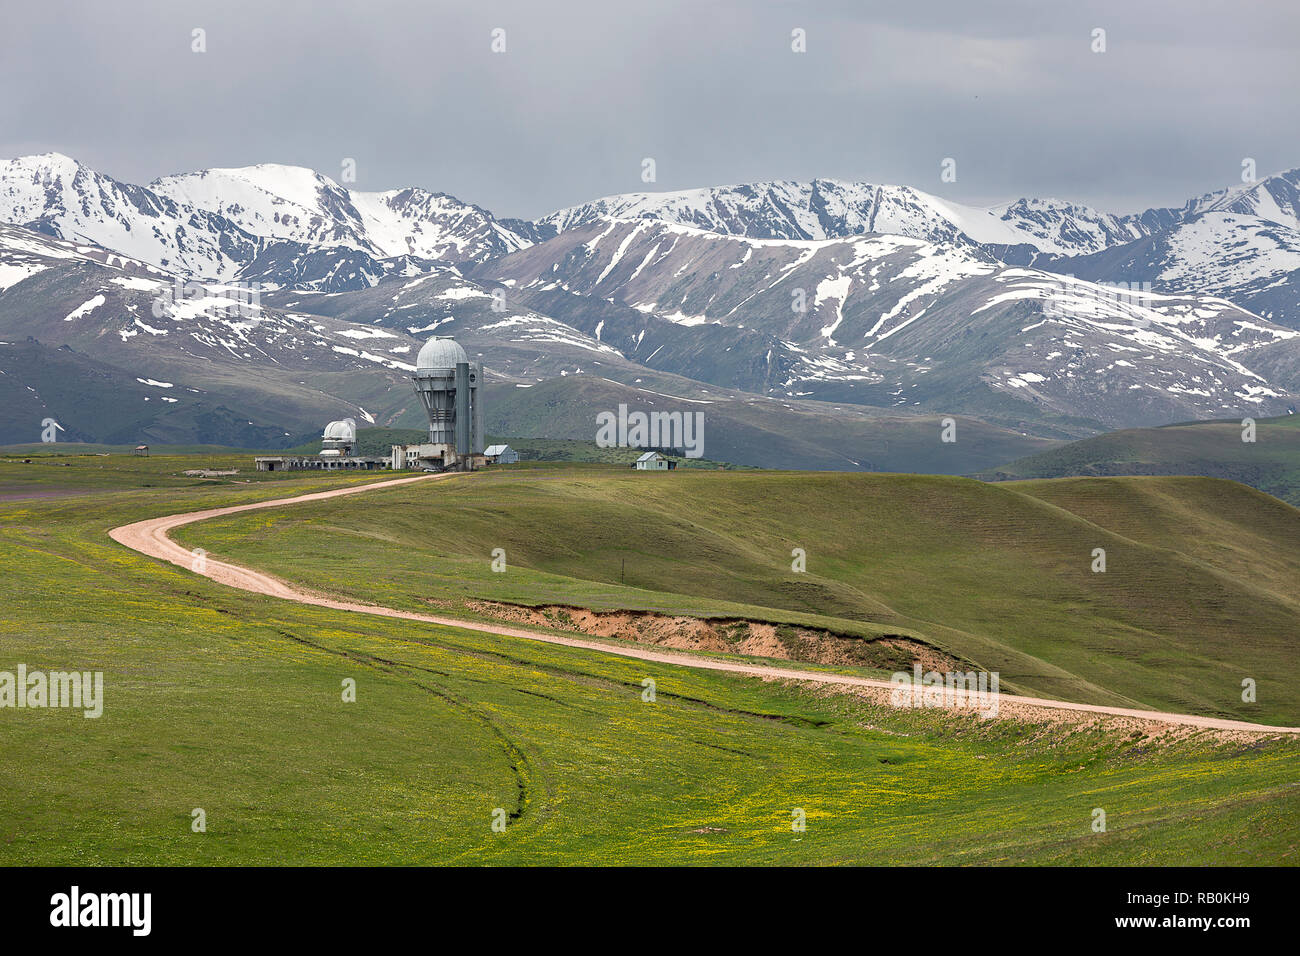 Telescope and observatory in Assy Plateau, Kazakhstan. Stock Photo